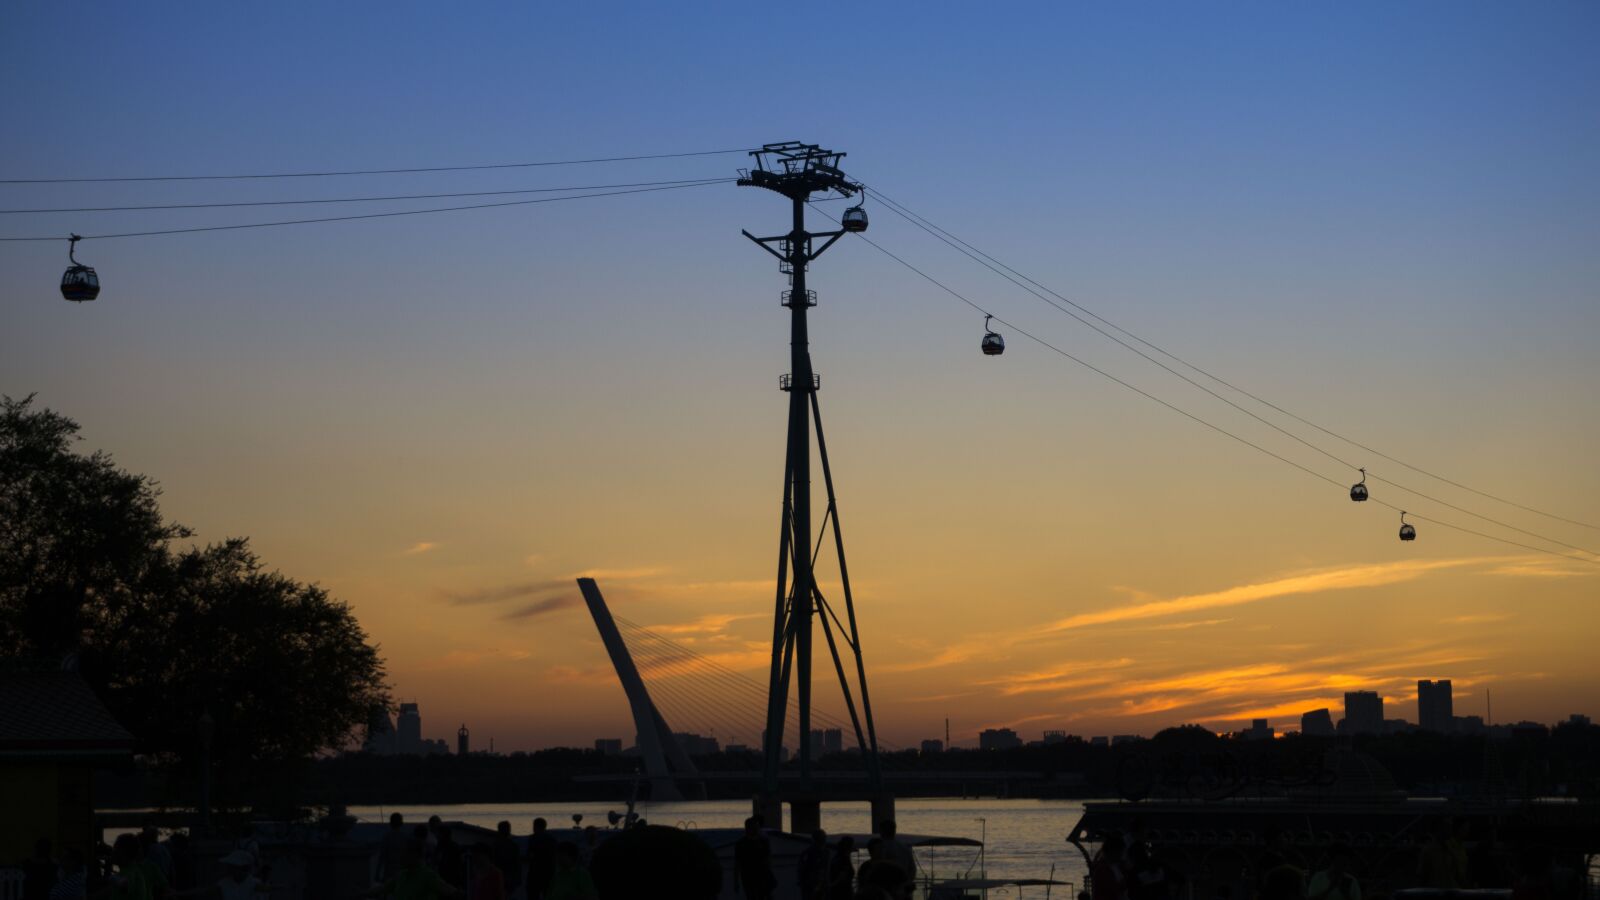 Sony a5100 sample photo. Sunset, backlighting, ropeway photography